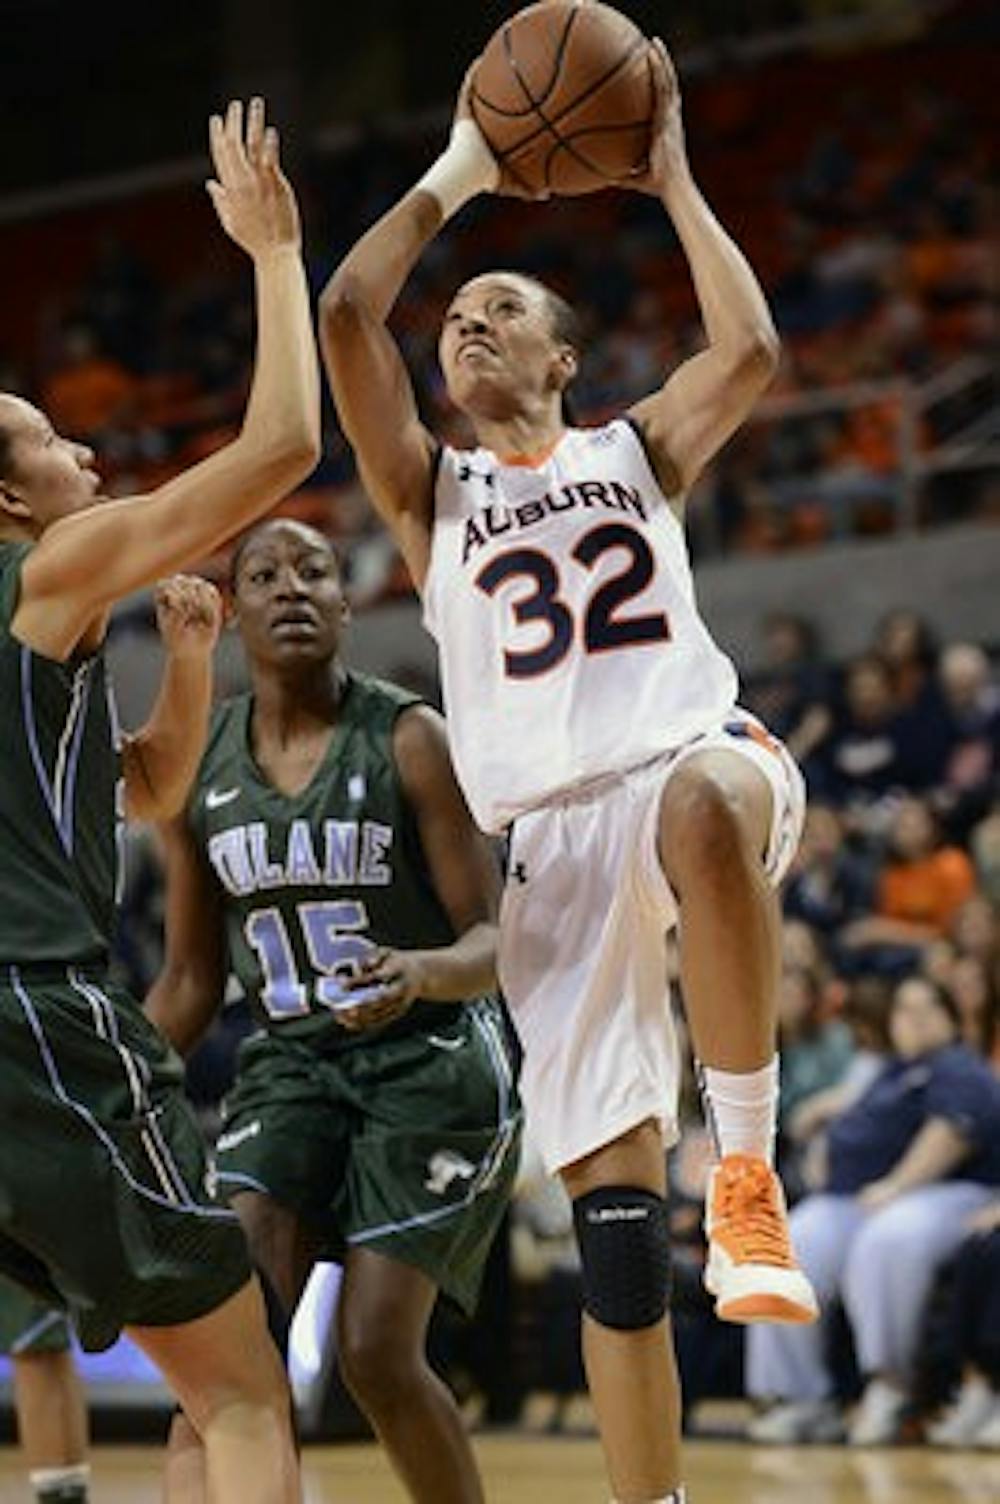 Tyrese Tanner in the first half.
Women's NIT Basketball, Tulane vs Auburn on March 27, in Auburn. (Courtesy of Todd Van Emst)